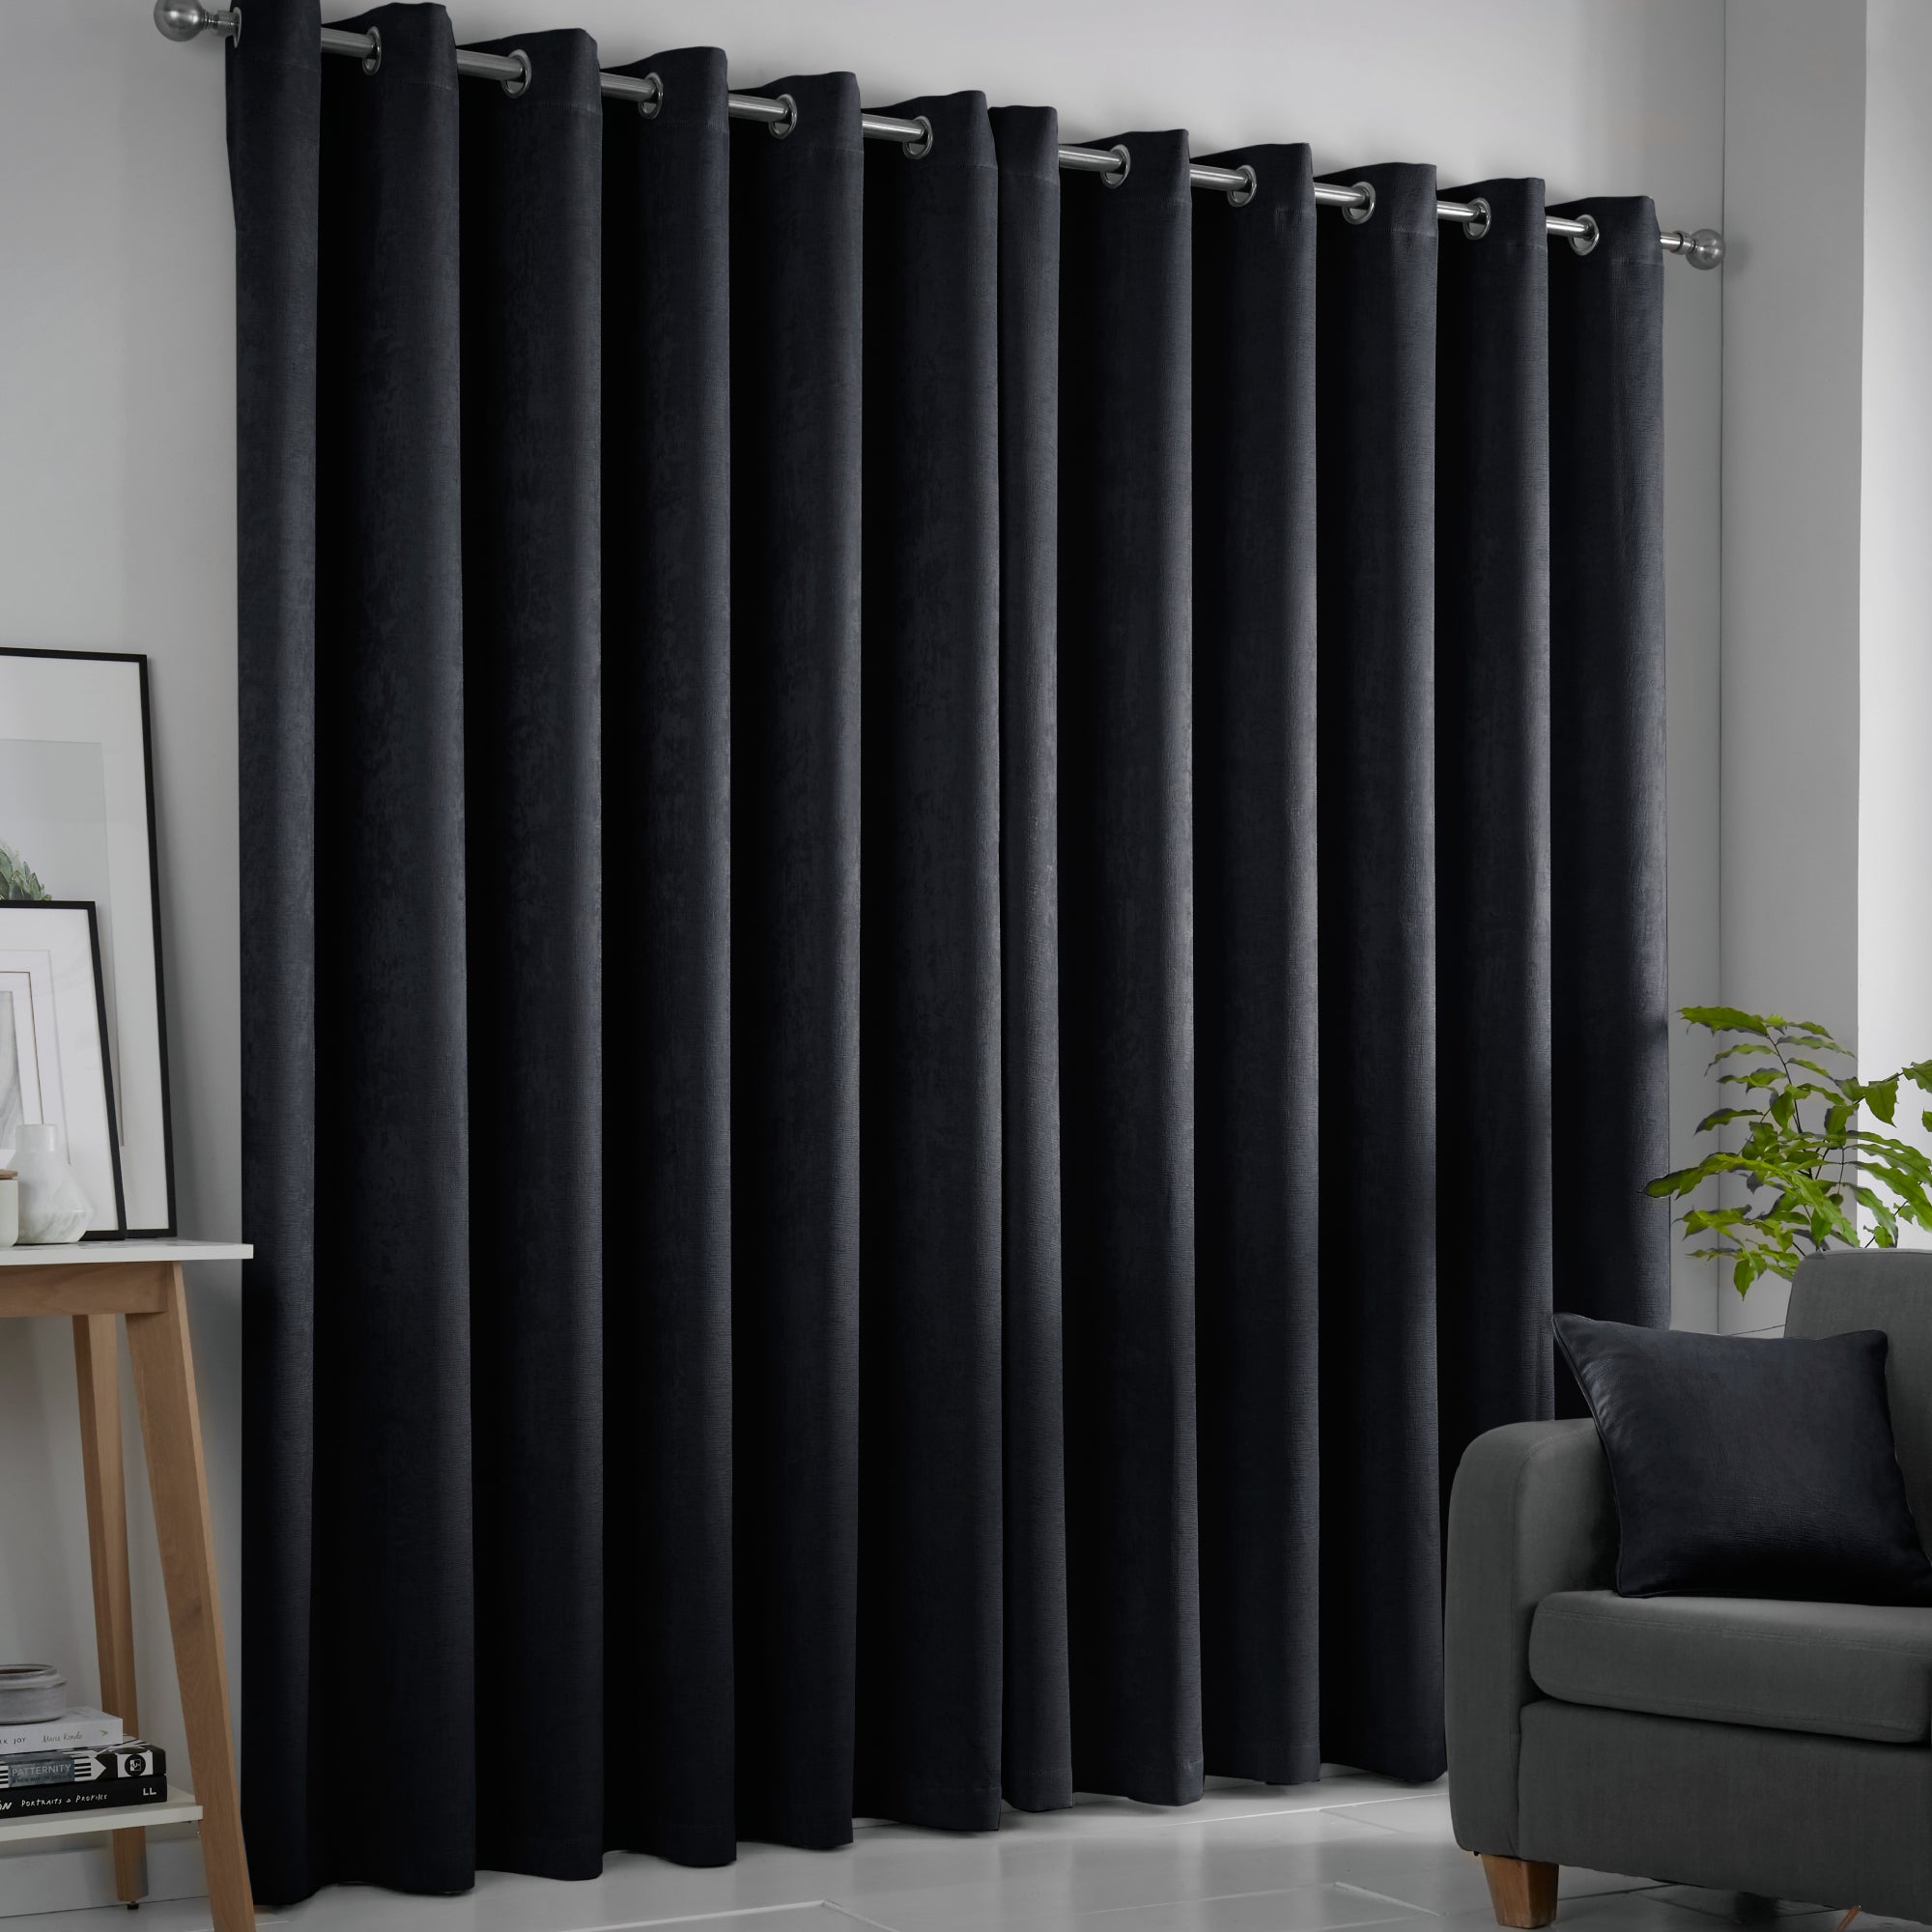 Pair of Eyelet Curtains Strata by Fusion in Black